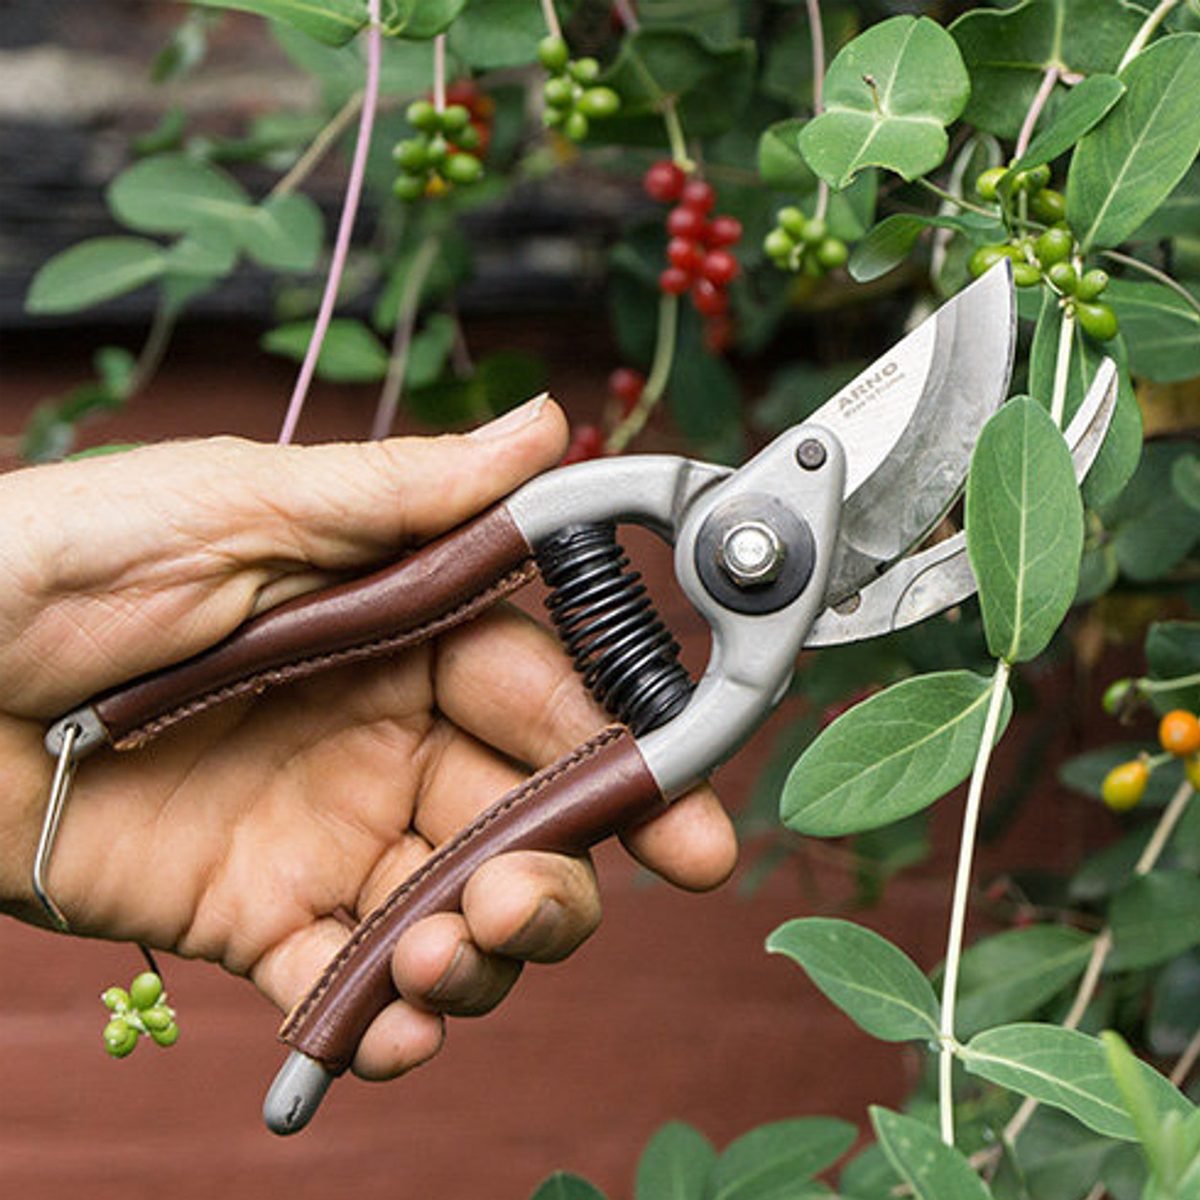 Choosing the Right Pruner for the Job